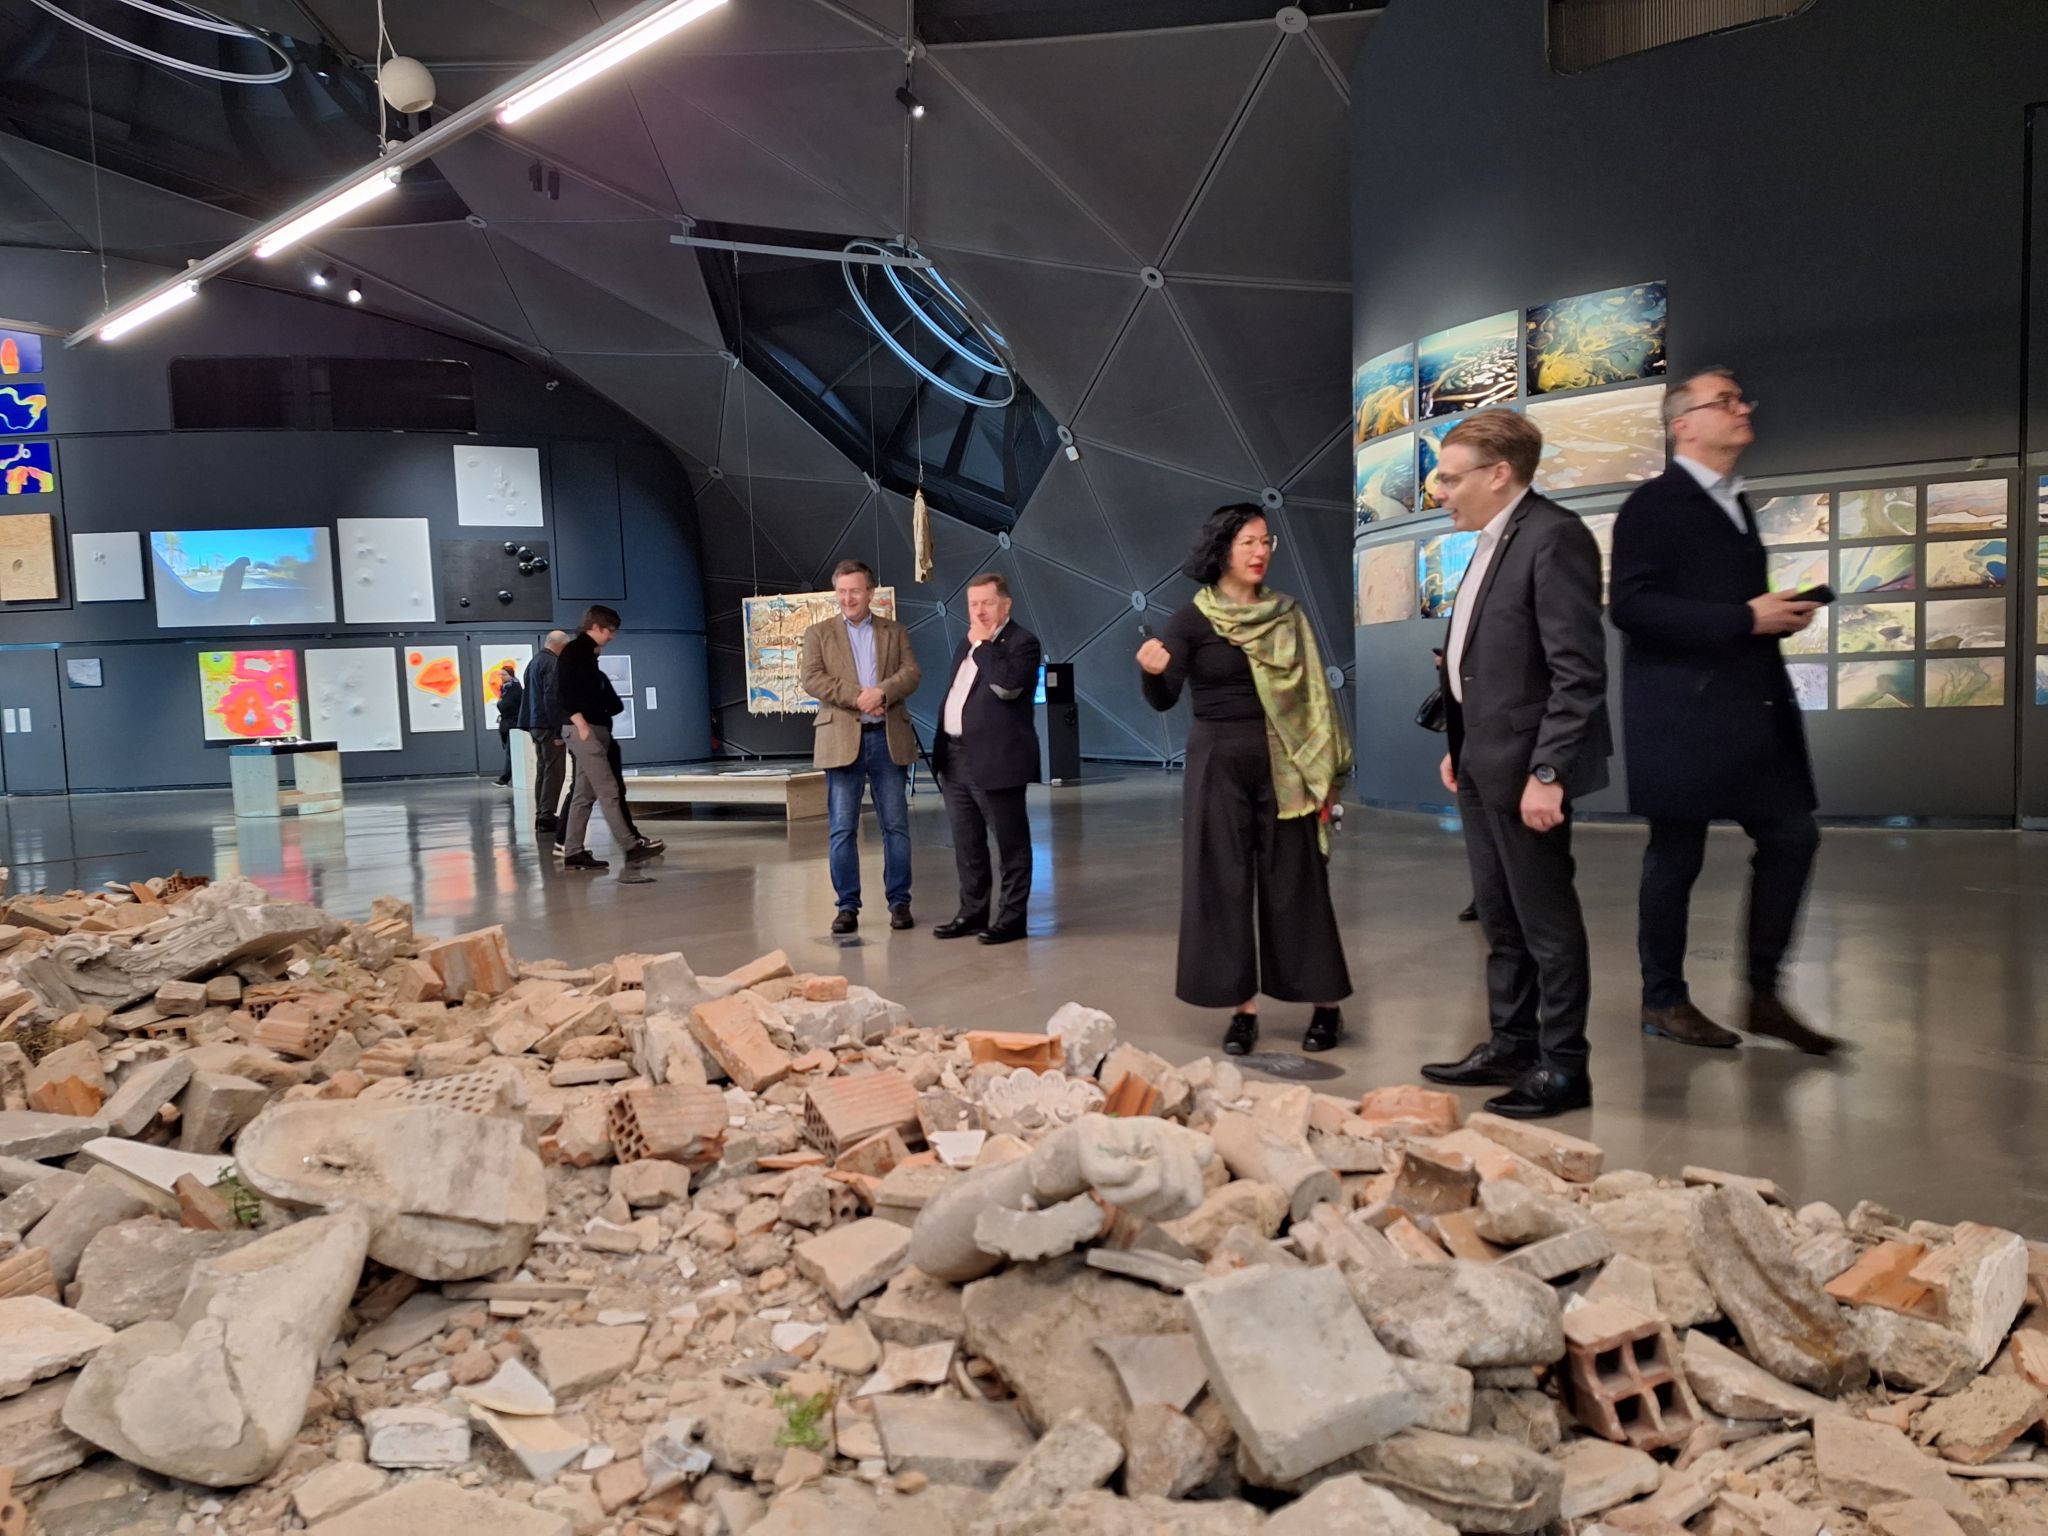 IOI President, Chris Field PSM, undertaking a private guided tour by the Director of the modern art museum, the Kunsthaus Graz.